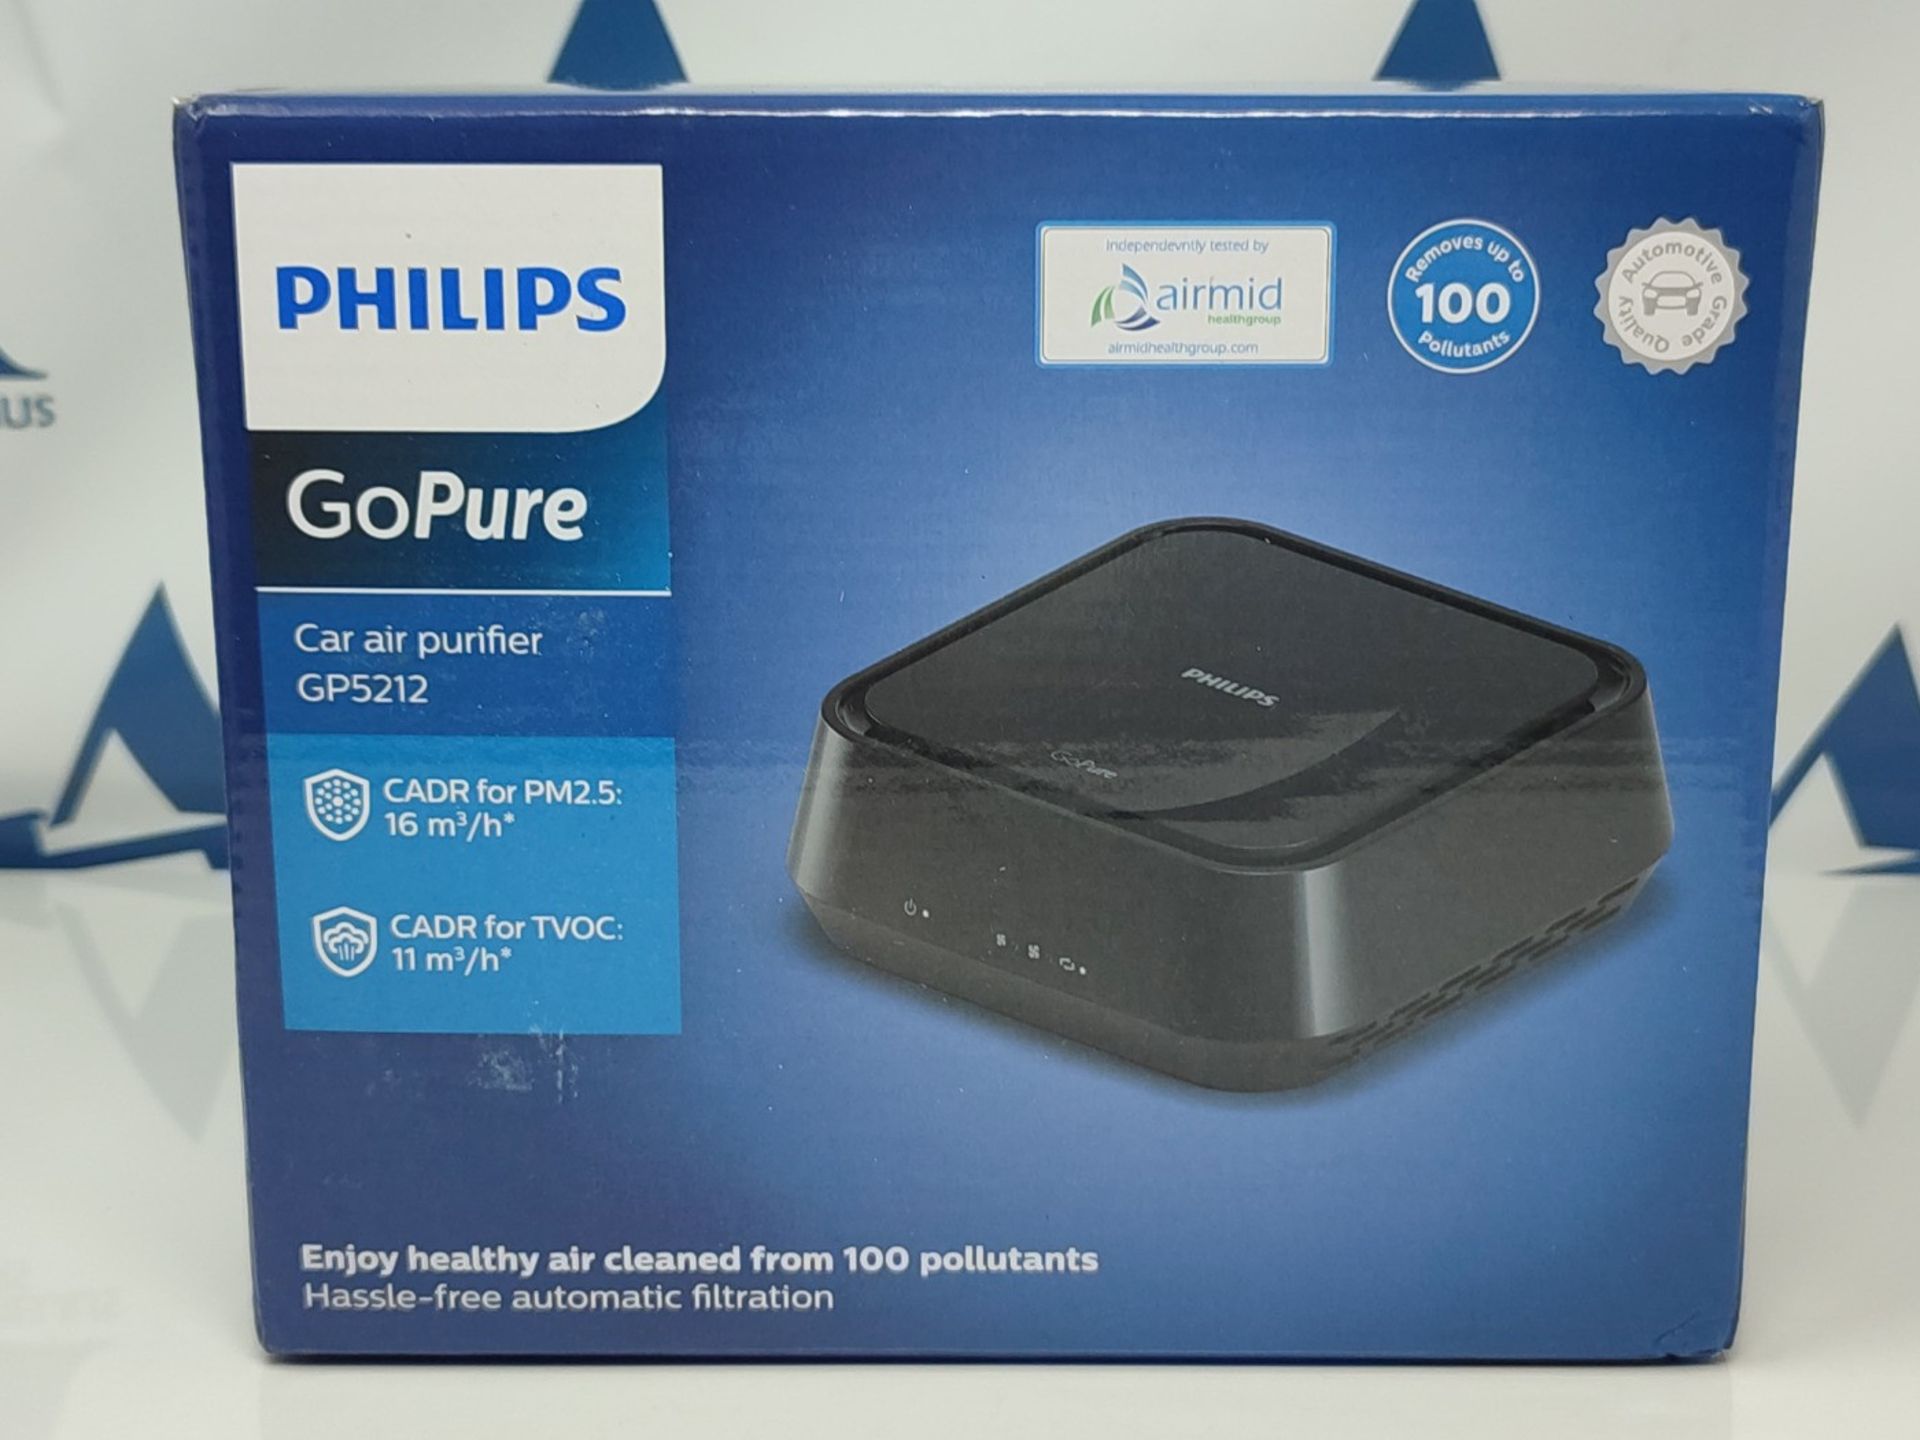 RRP £59.00 Philips car air purifier GoPure 5212 Black - Image 2 of 3